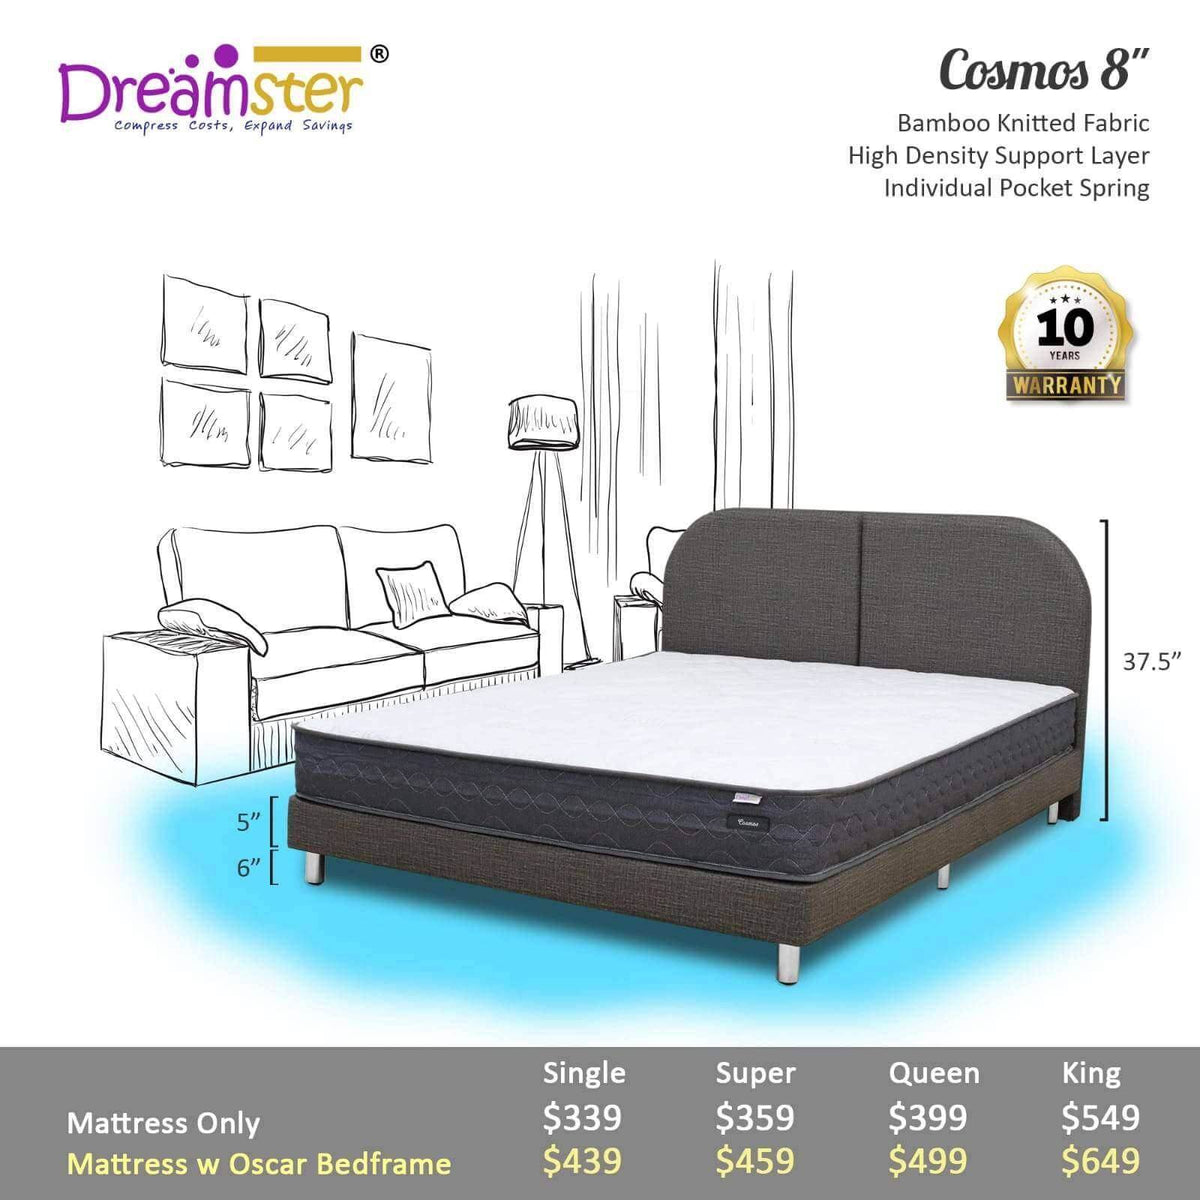 Dreamster Cosmos Pocketed Spring Mattress + Bed Frame Singapore